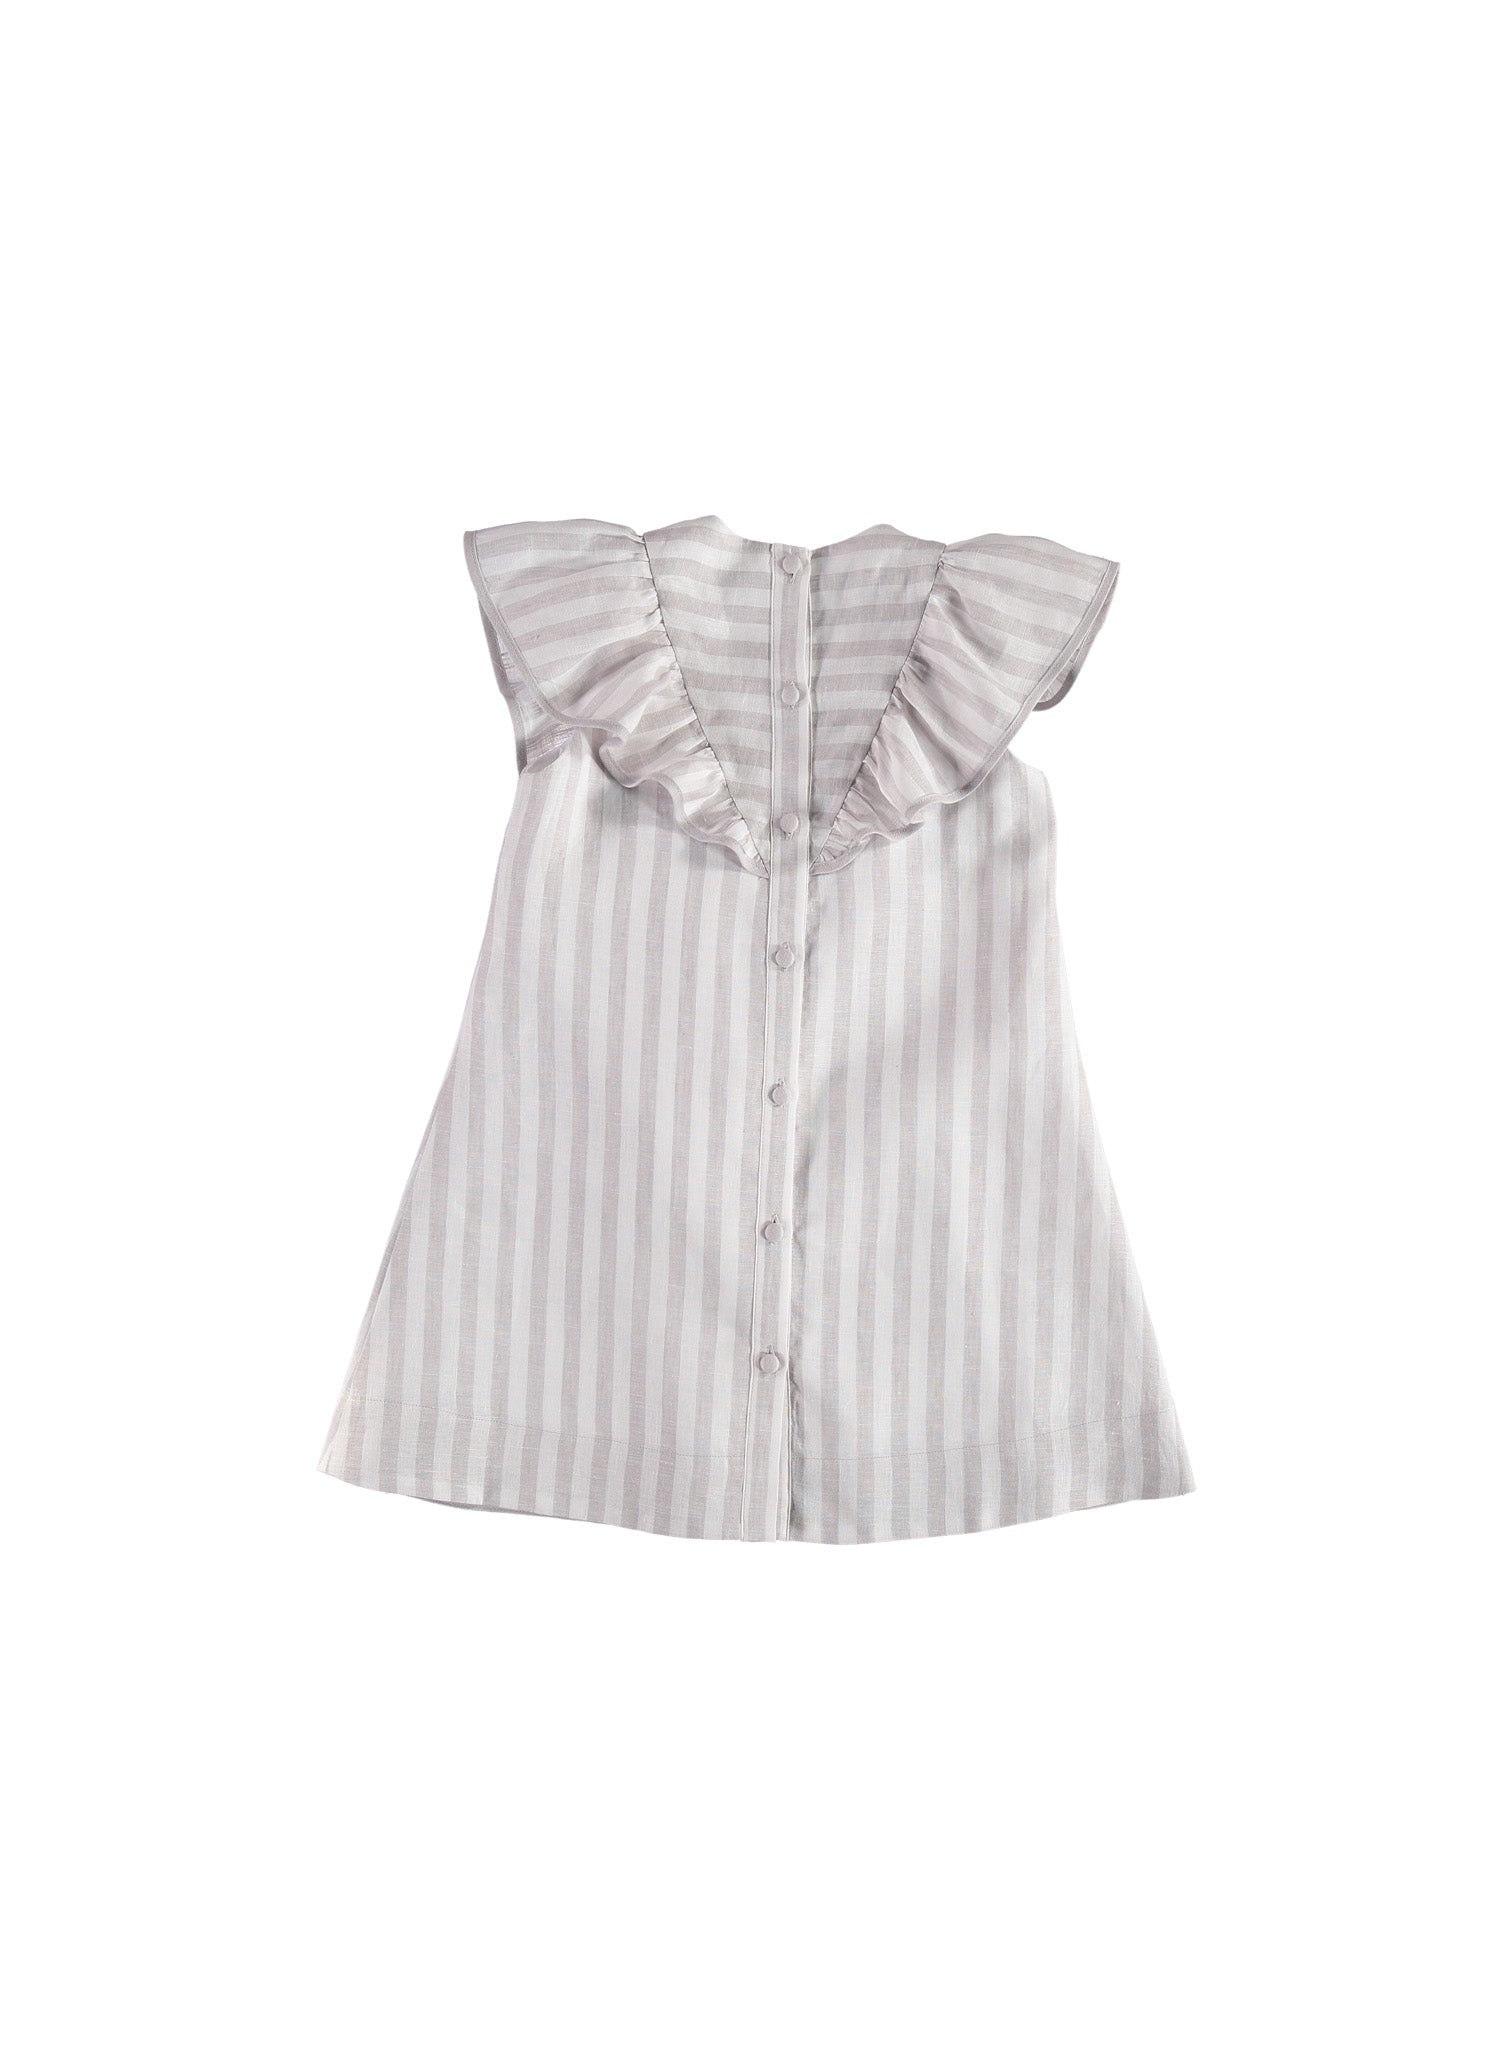 Carbon Soldiers Eagle Dress in Grey/White Stripes – Hello Alyss ...